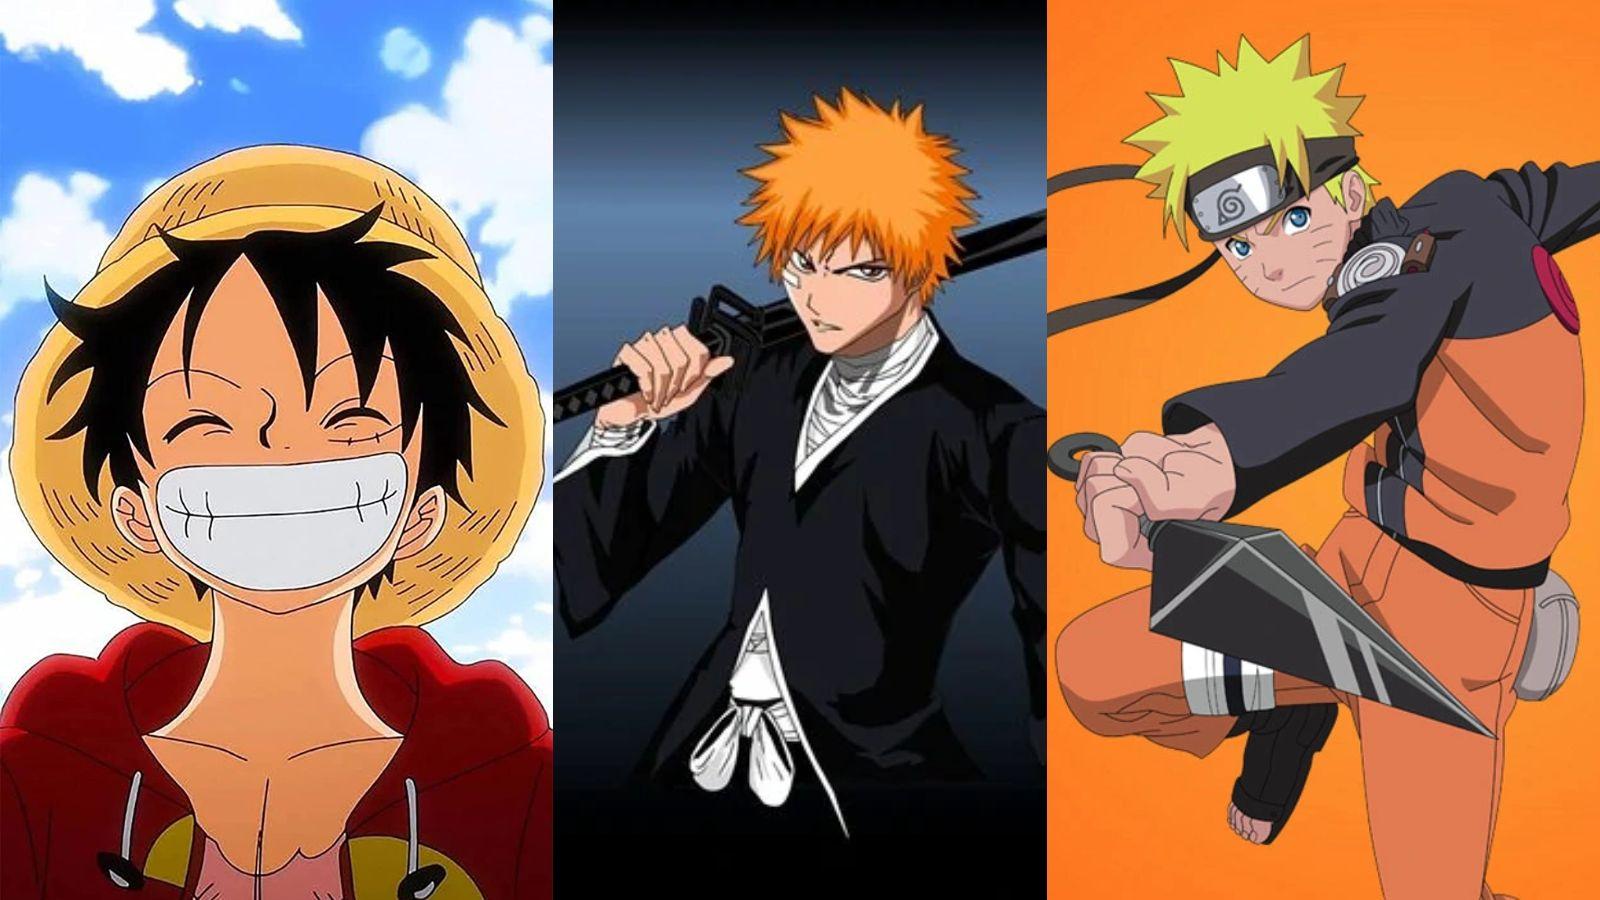 An image featuring the protagonist of One Piece, Bleach, and Naruto